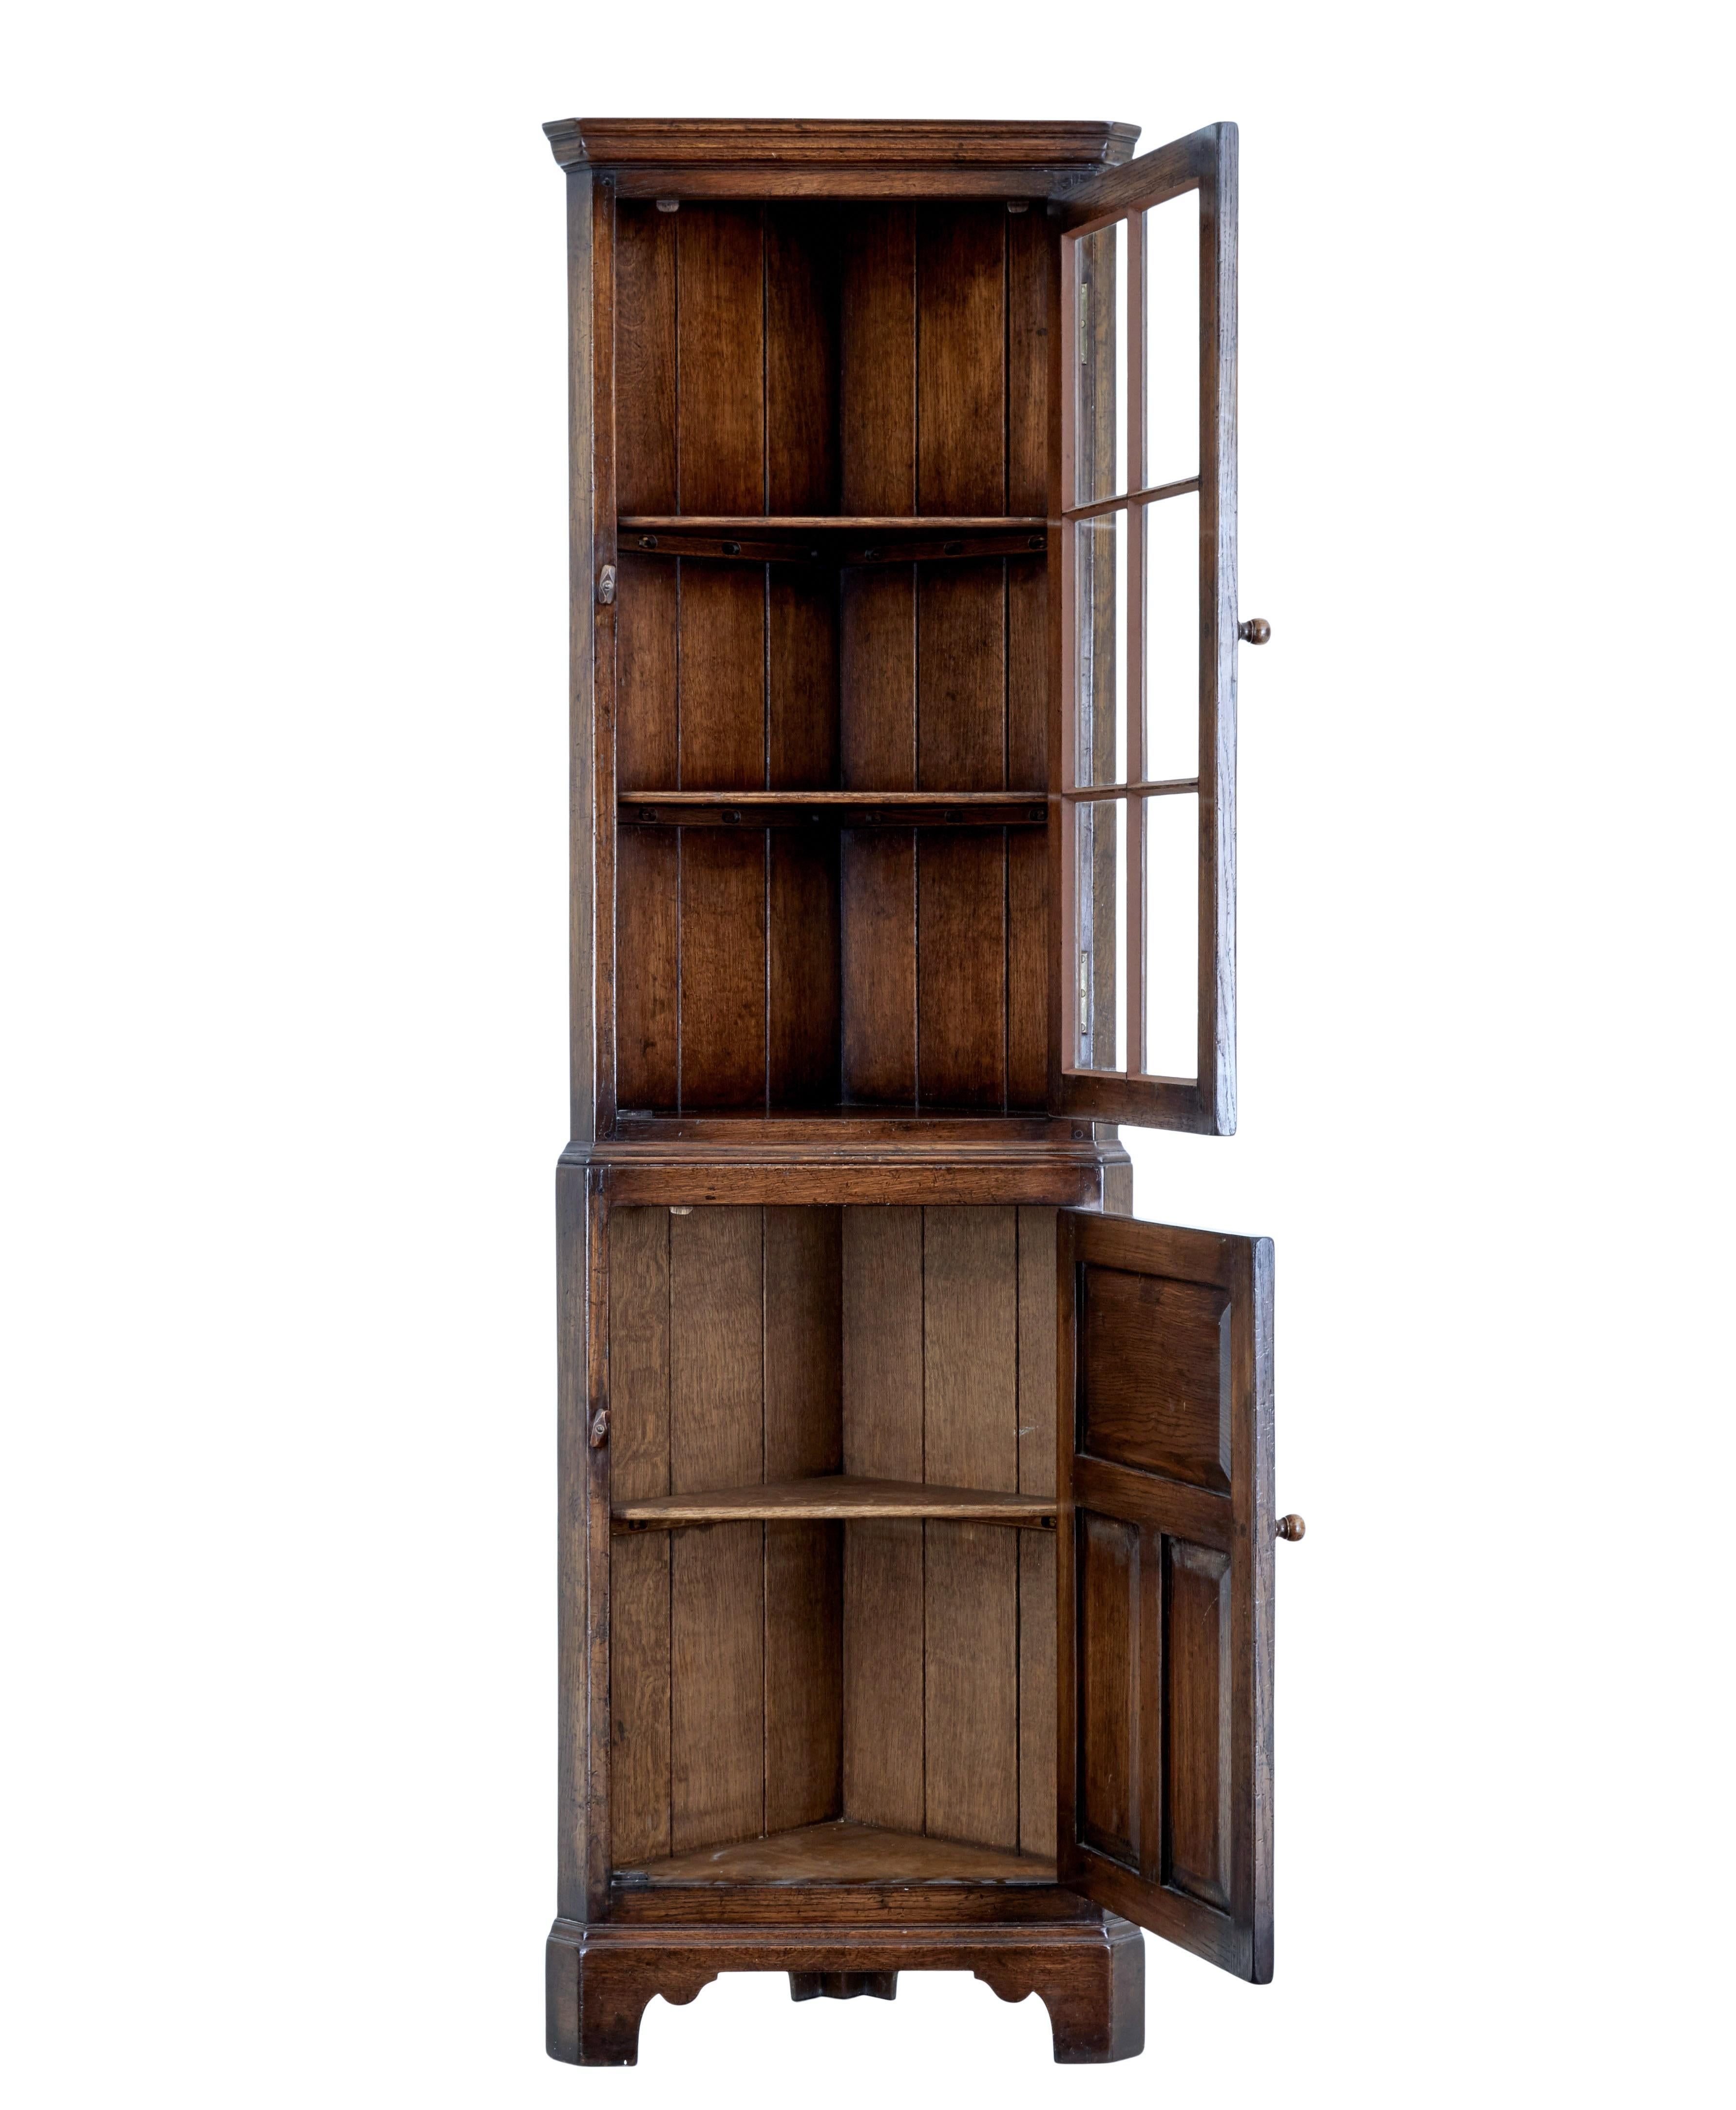 20th century english oak corner cabinet circa 1980.

Good quality piece of practical country furniture for the home, which offers the perfect storage solution for corners.

Made in the rustic country style, this 1 piece unit has a single glazed